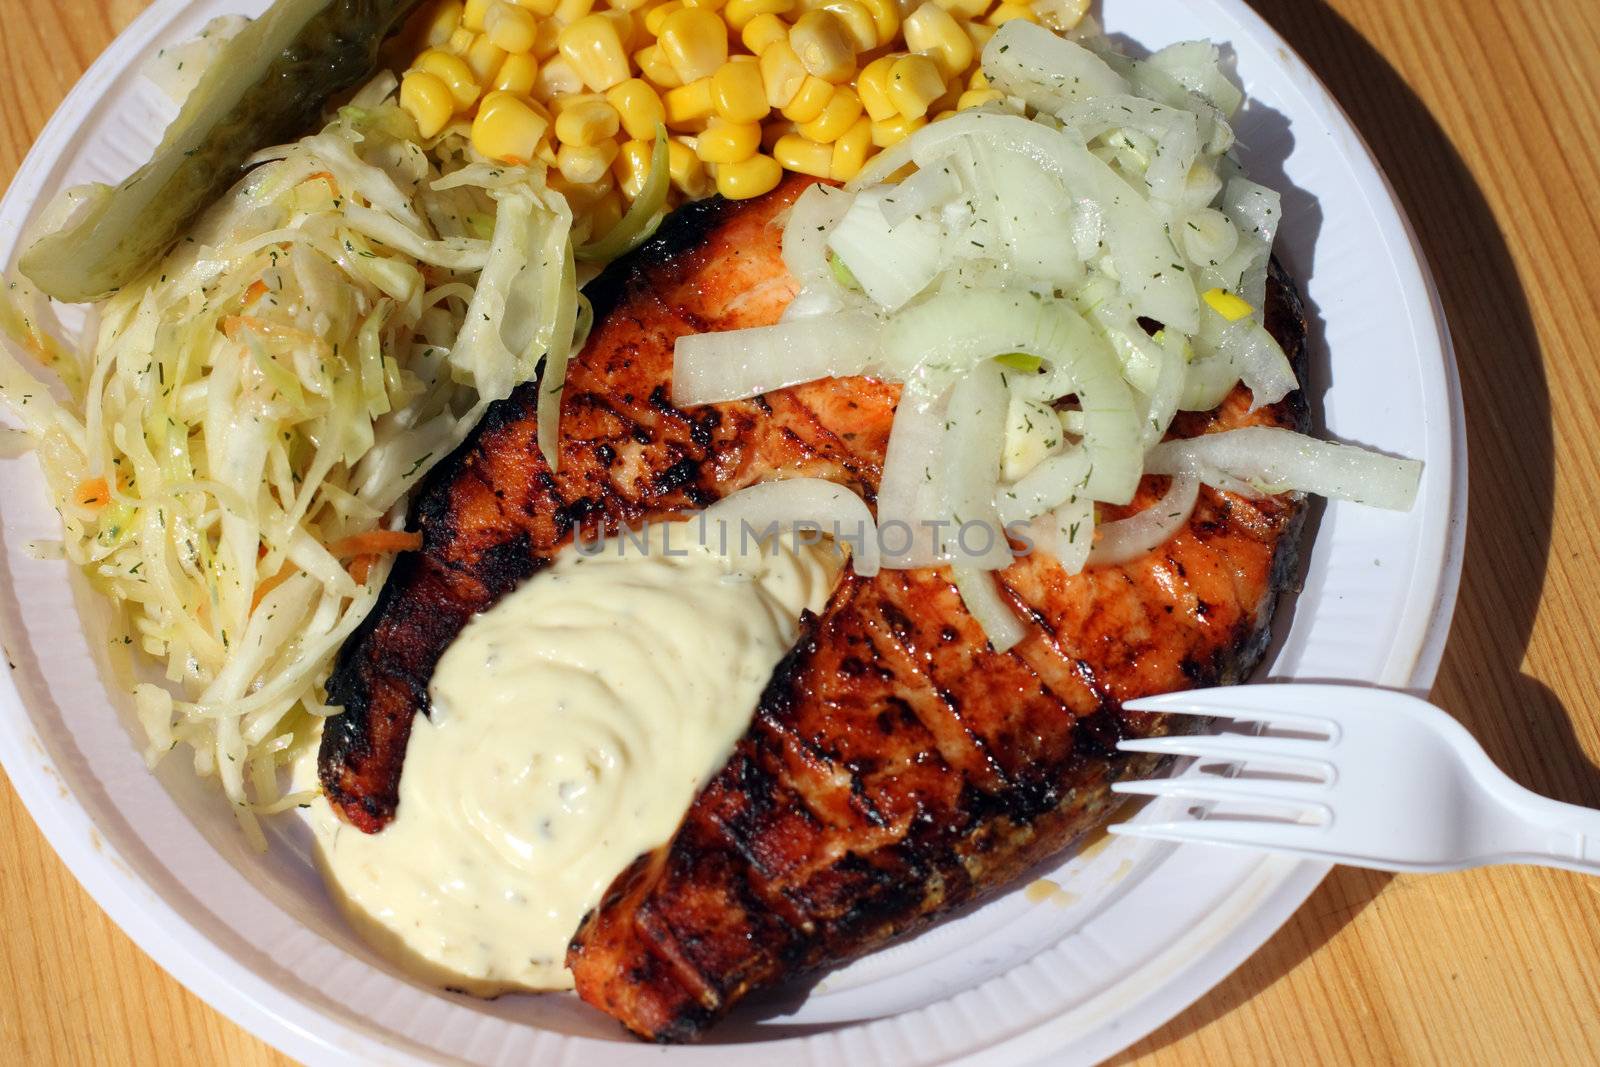 Fish, salmon, cabbage, an onion, corn, meal, food, sauce,  plate,  plug to fry,  dinner, supper